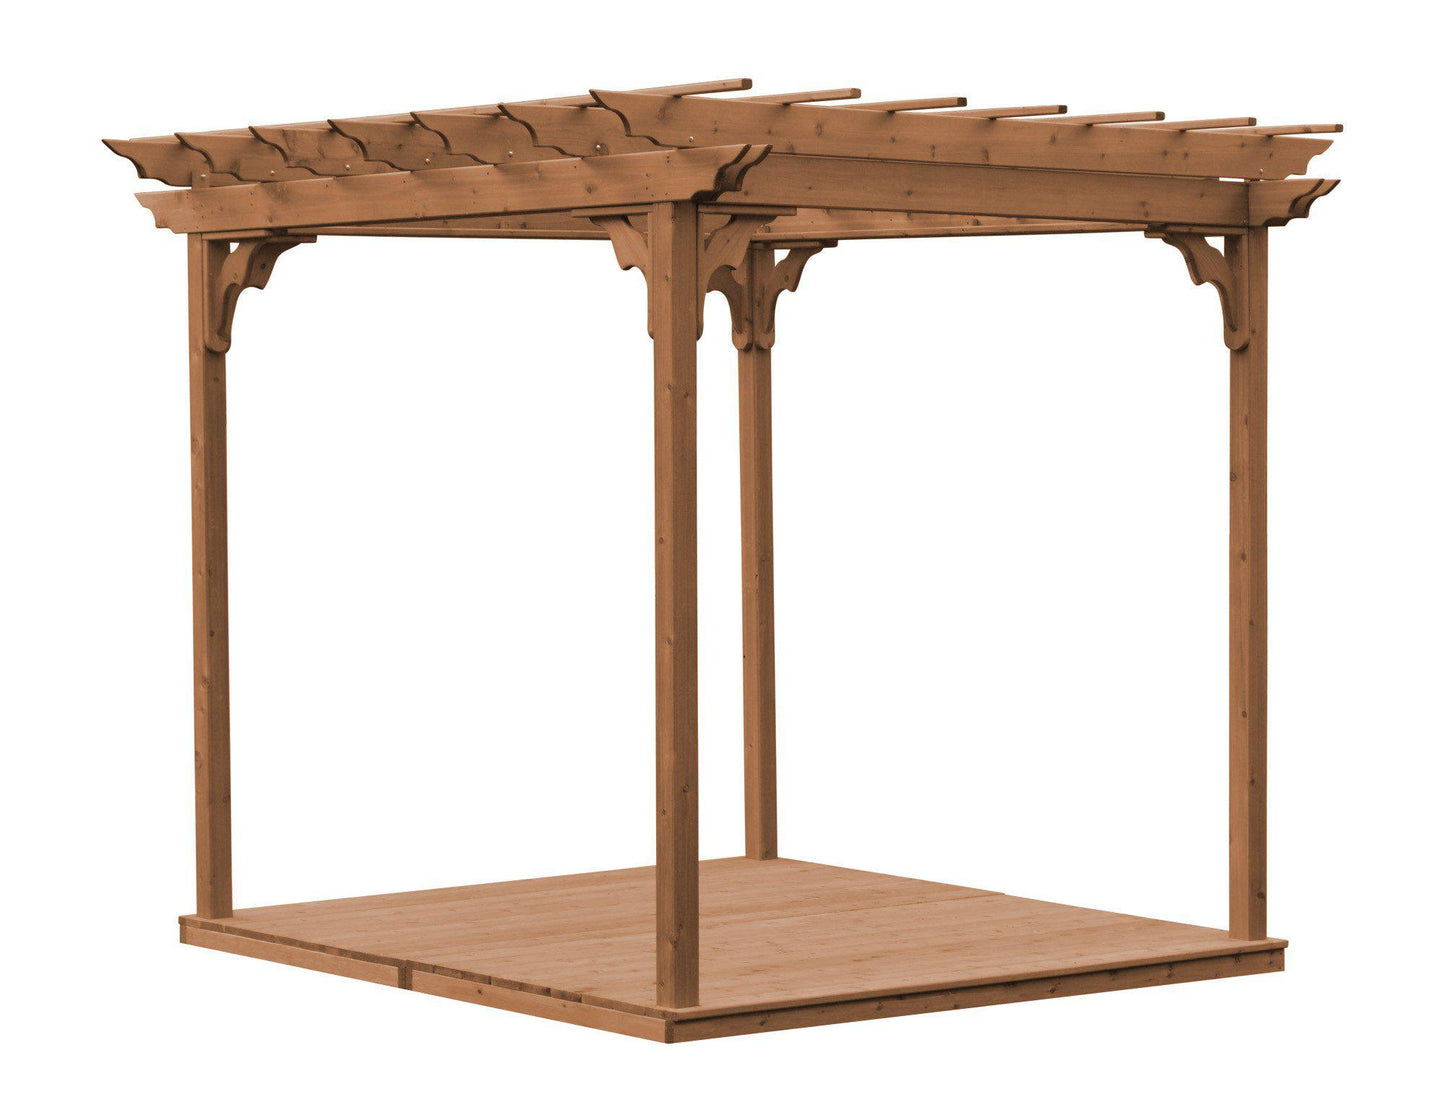 A&L FURNITURE CO. Western Red Cedar 8'x10' Pergola w/Deck & Swing Hangers - LEAD TIME TO SHIP 4 WEEKS OR LESS